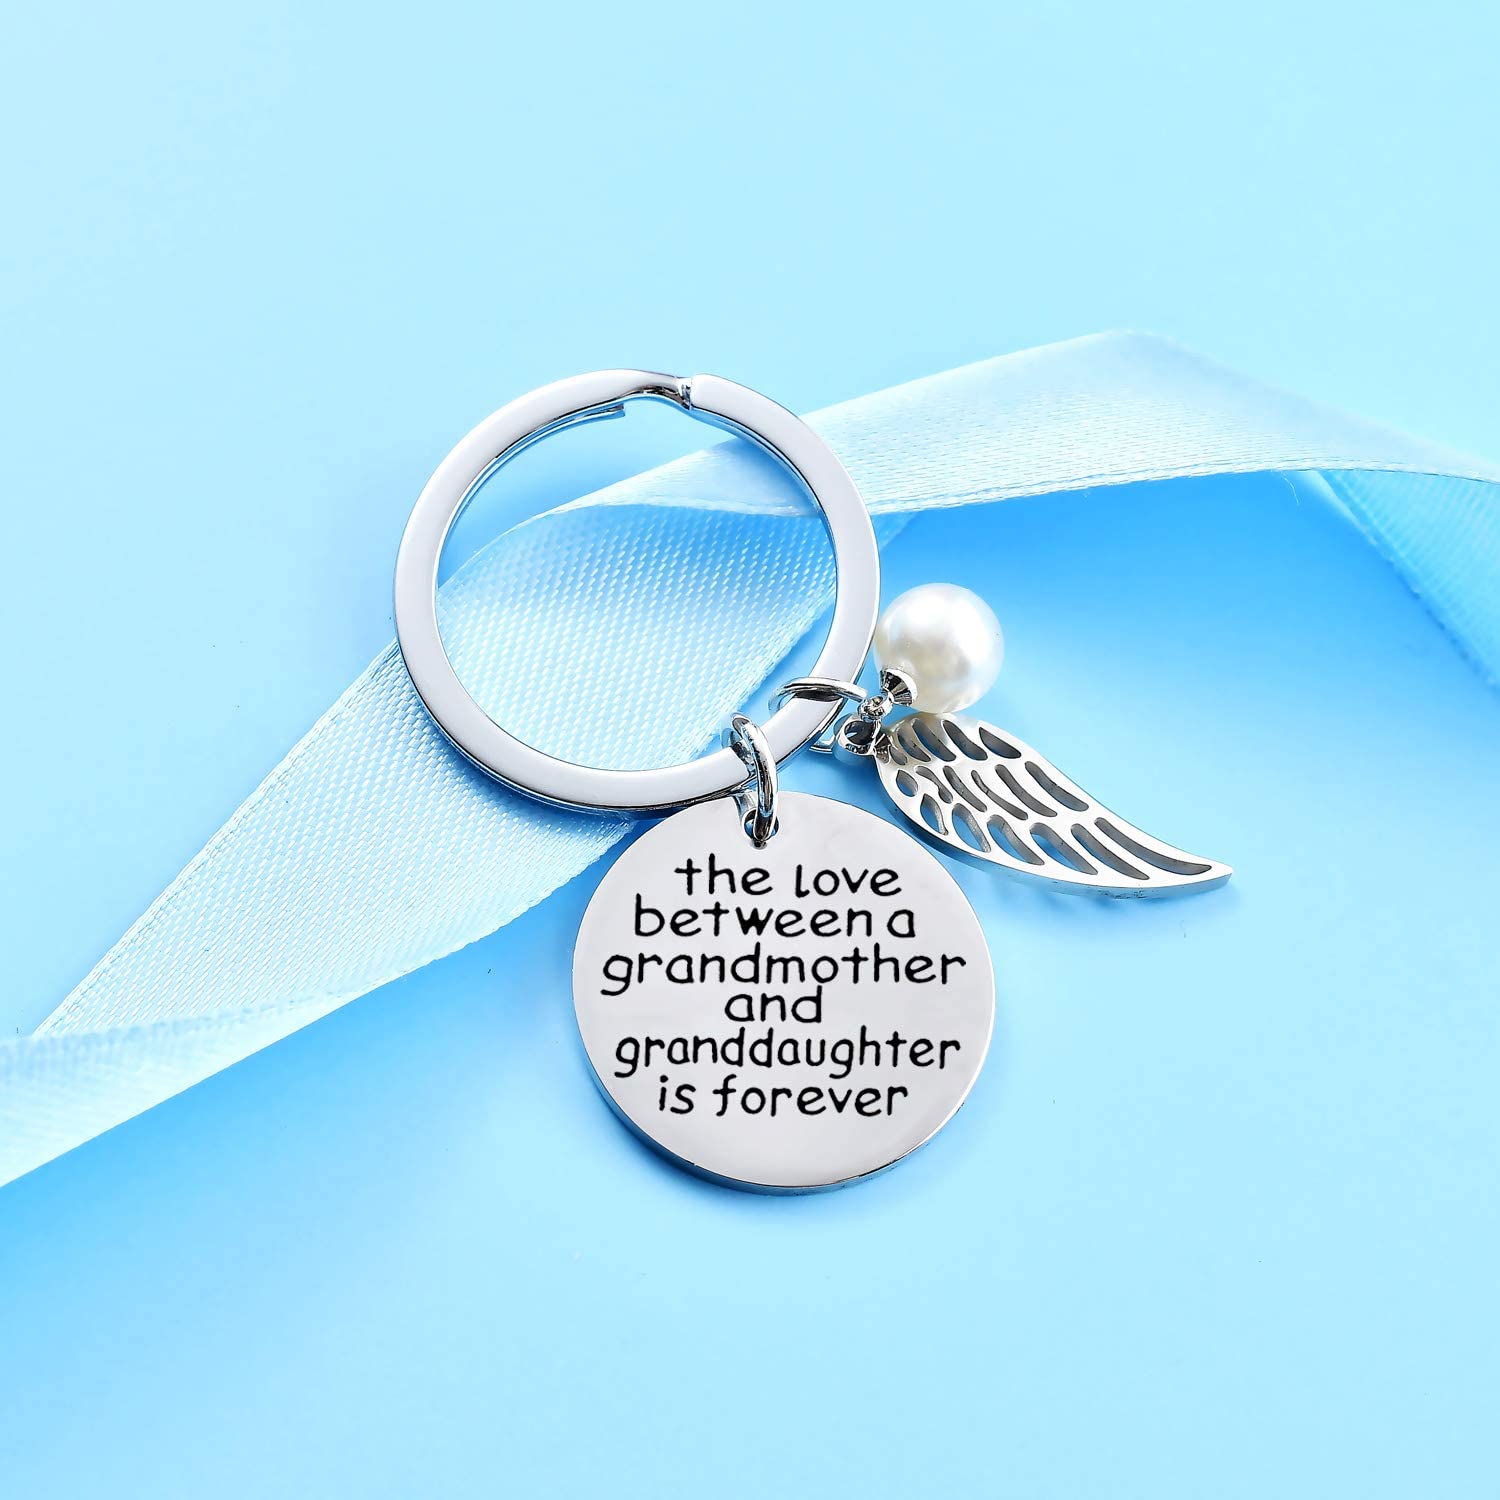 The Love Between a Grandmother and Granddaughter/Grandson is Forever Keychain Keychain GrindStyle 